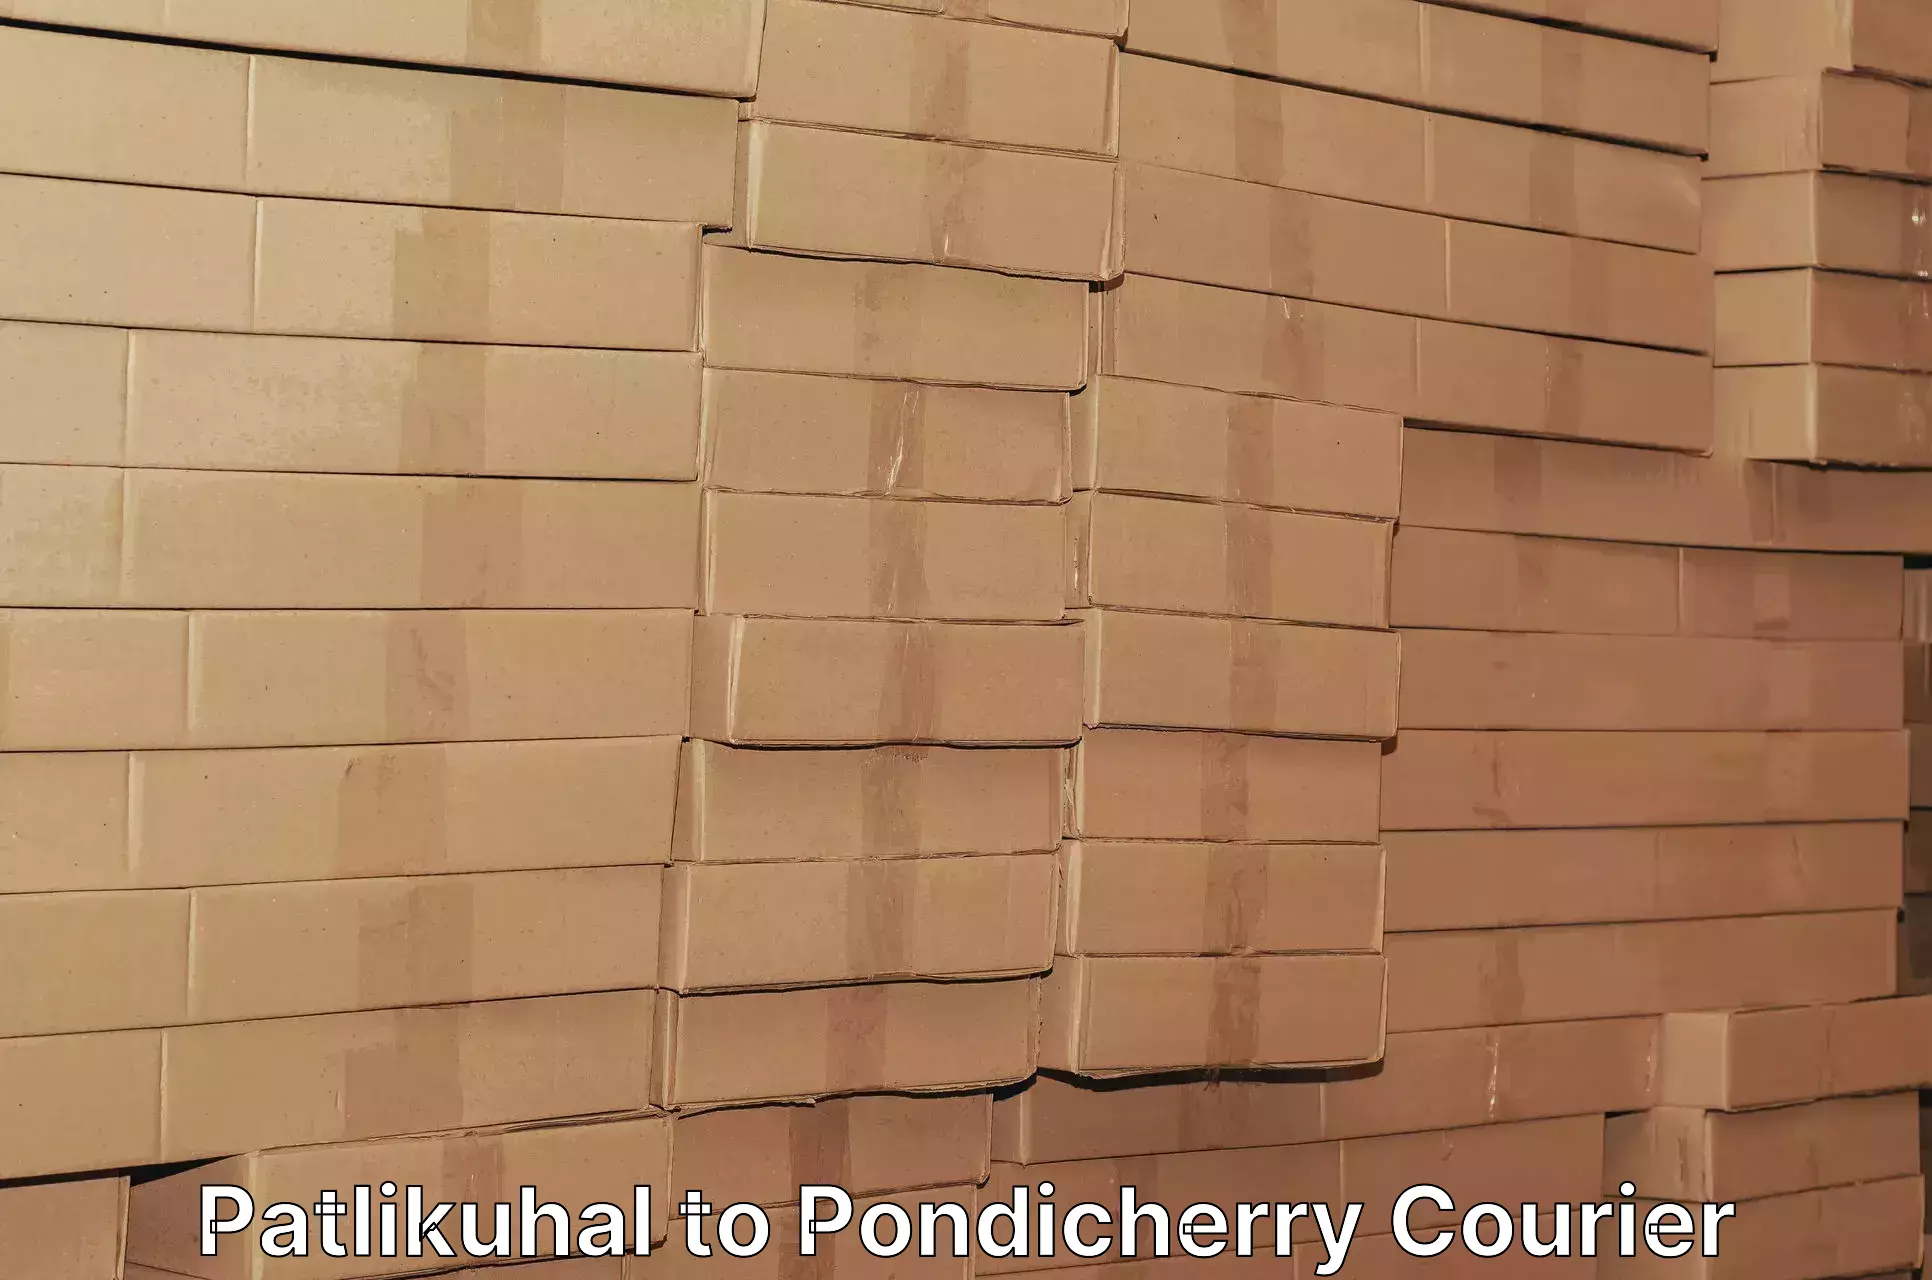 State-of-the-art courier technology Patlikuhal to Pondicherry University